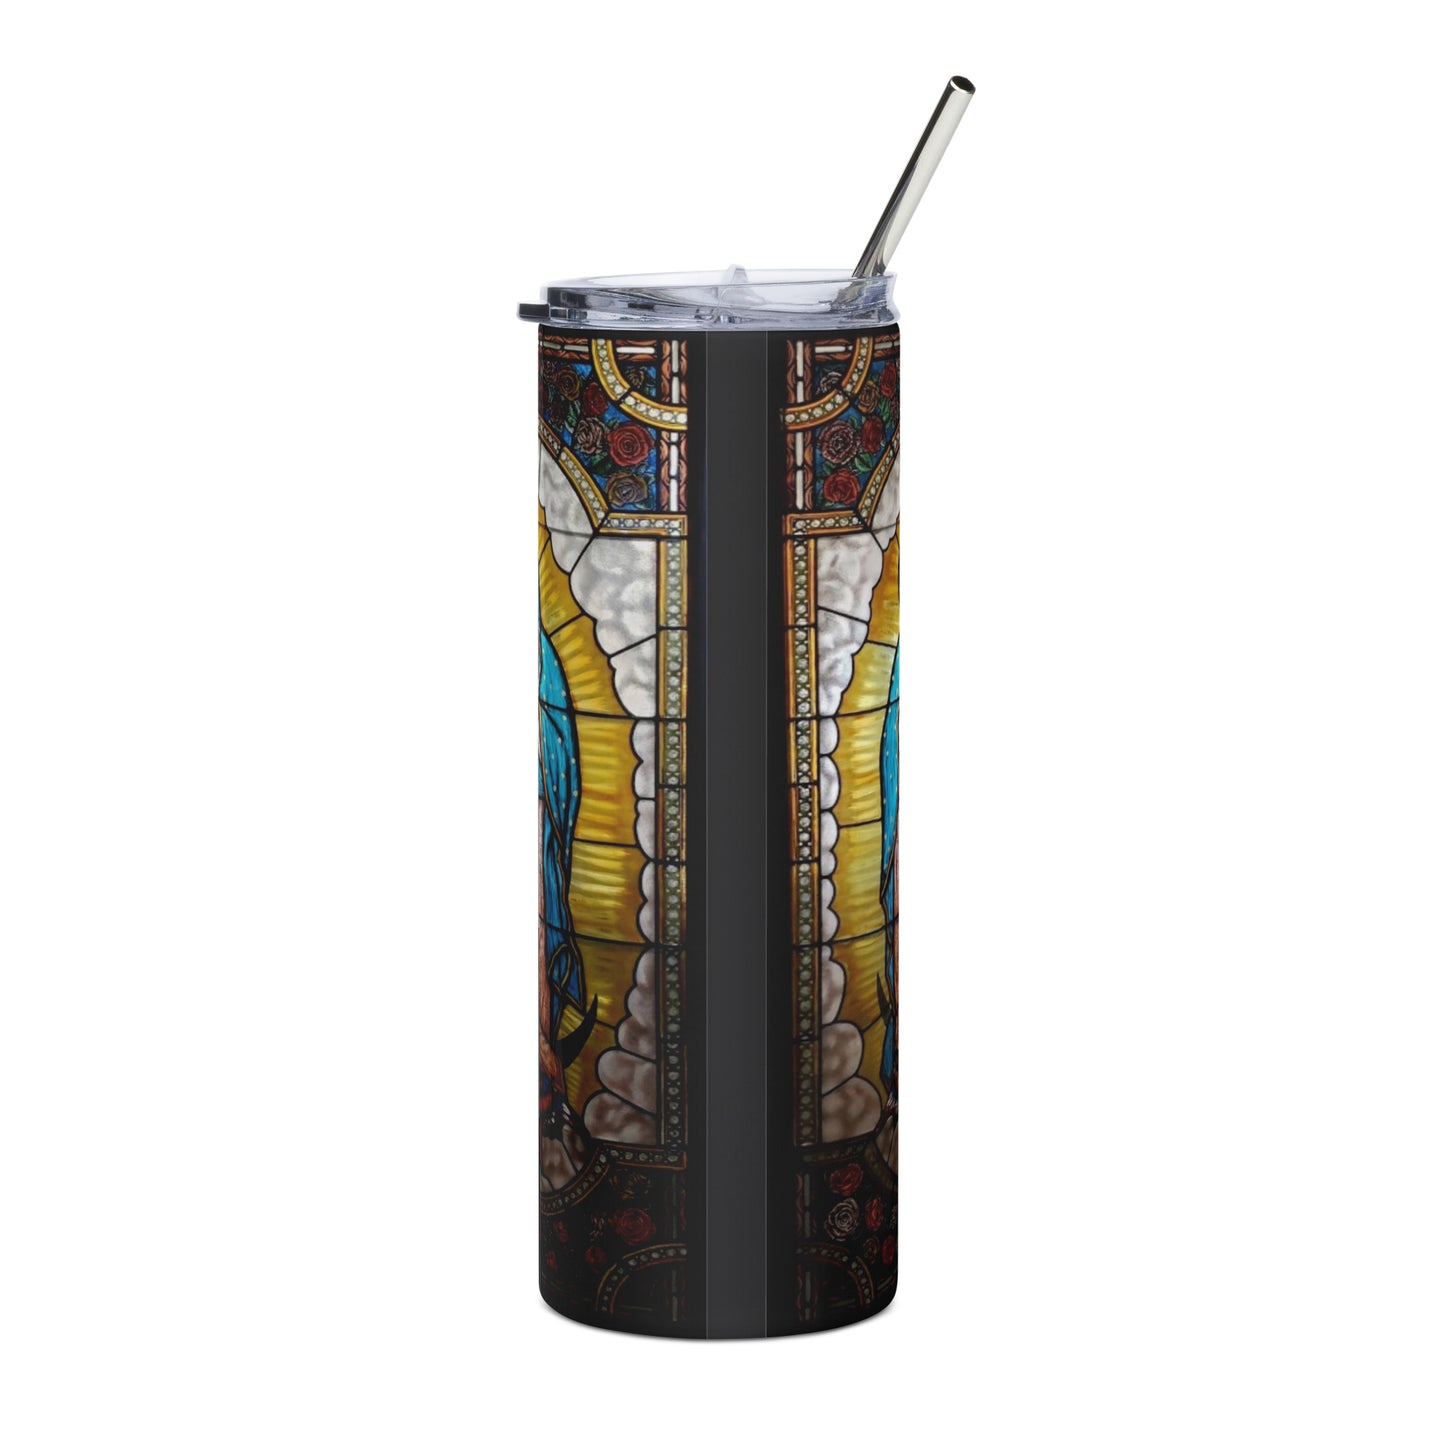 Our Lady of Guadalupe Tumbler